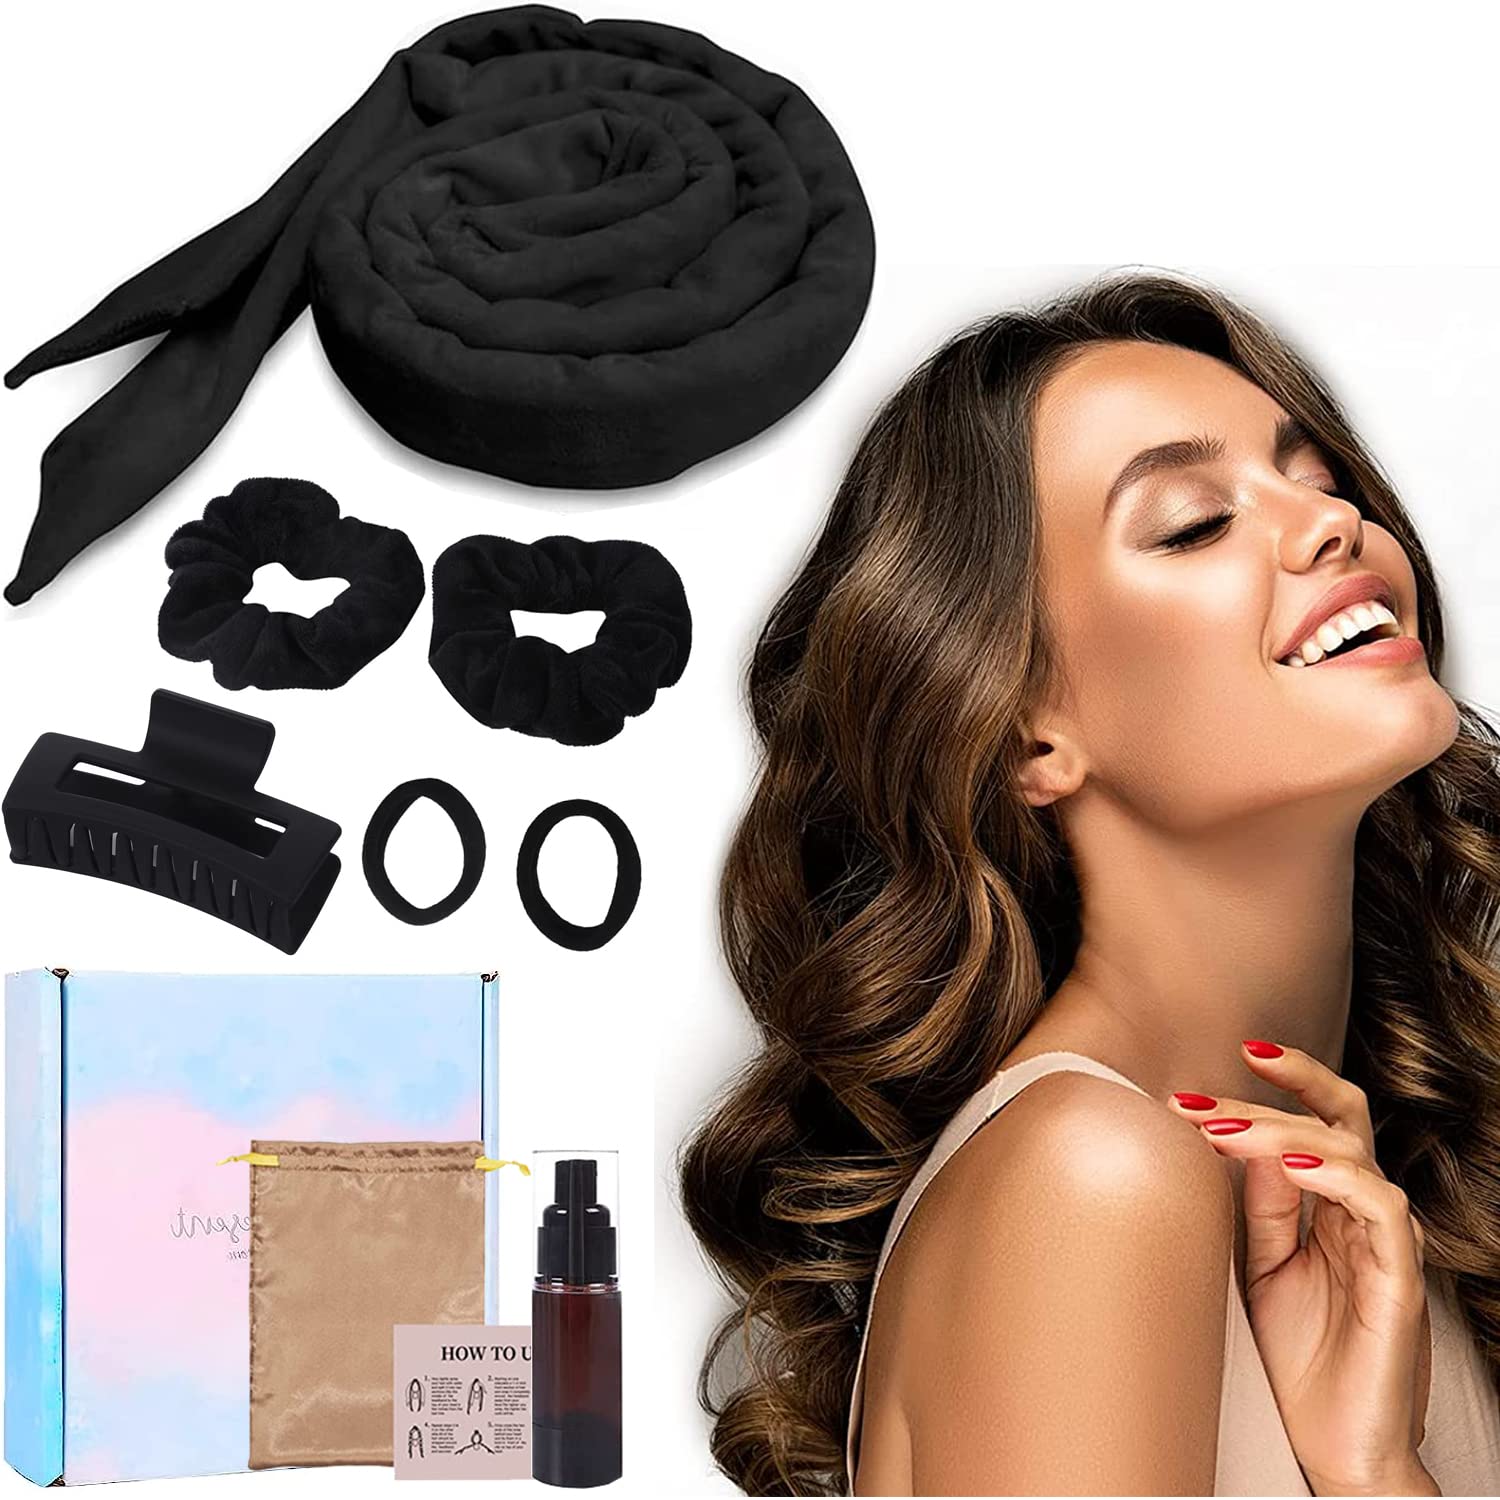 Curler Curls Without Heat, Non-Slip Heatless Curls, Overnight Curls with Headband, DIY Heatless Curls Band, Hairstyle Set, for Long Medium Hair (Black)